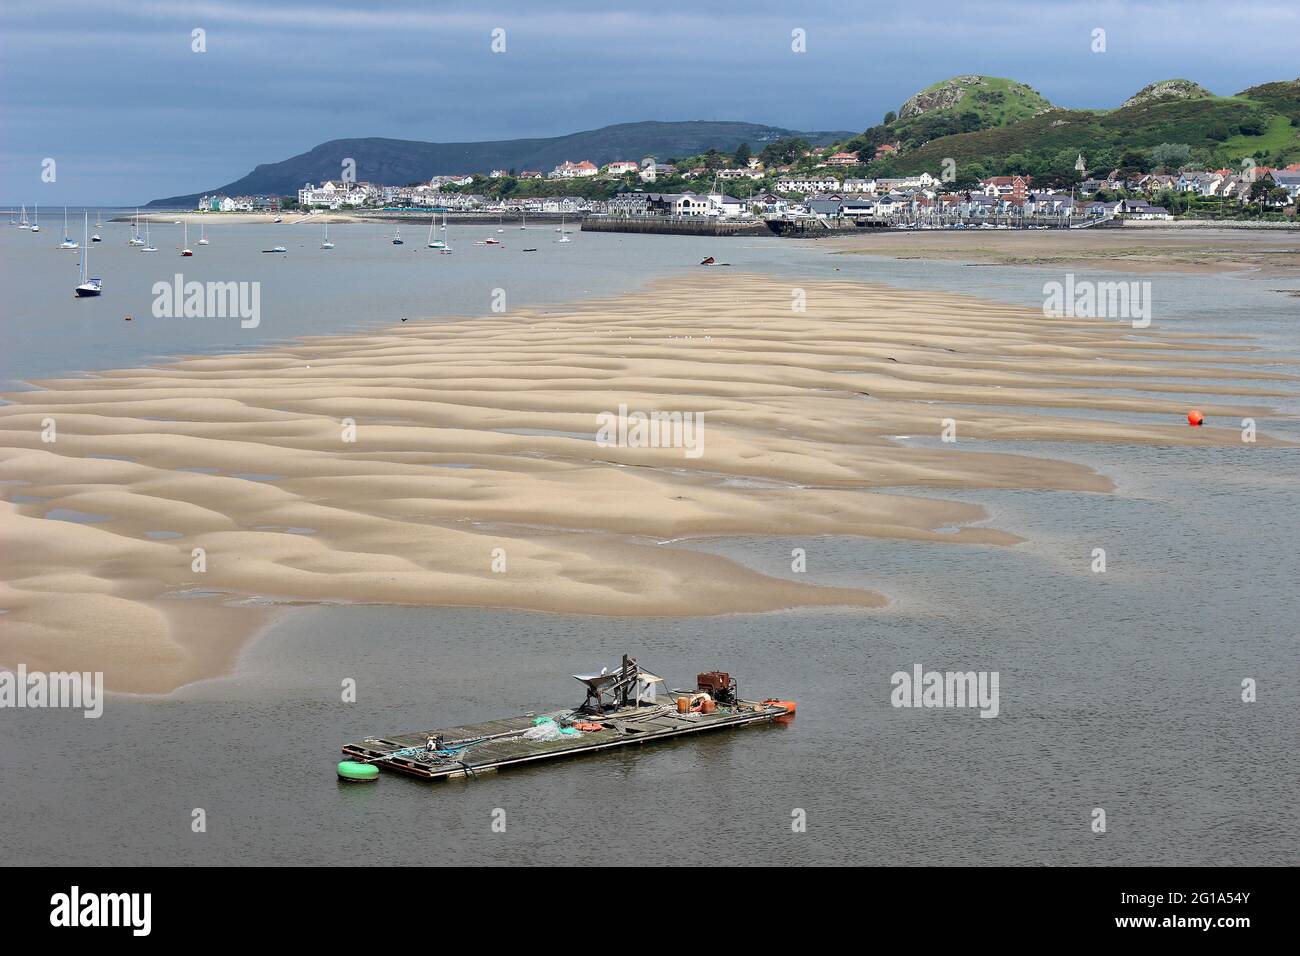 Tidal Sandbanks Exposed In The Conway Estuary At Low Tide, mussel sorting barge in foreground, Deganwy in background Stock Photo